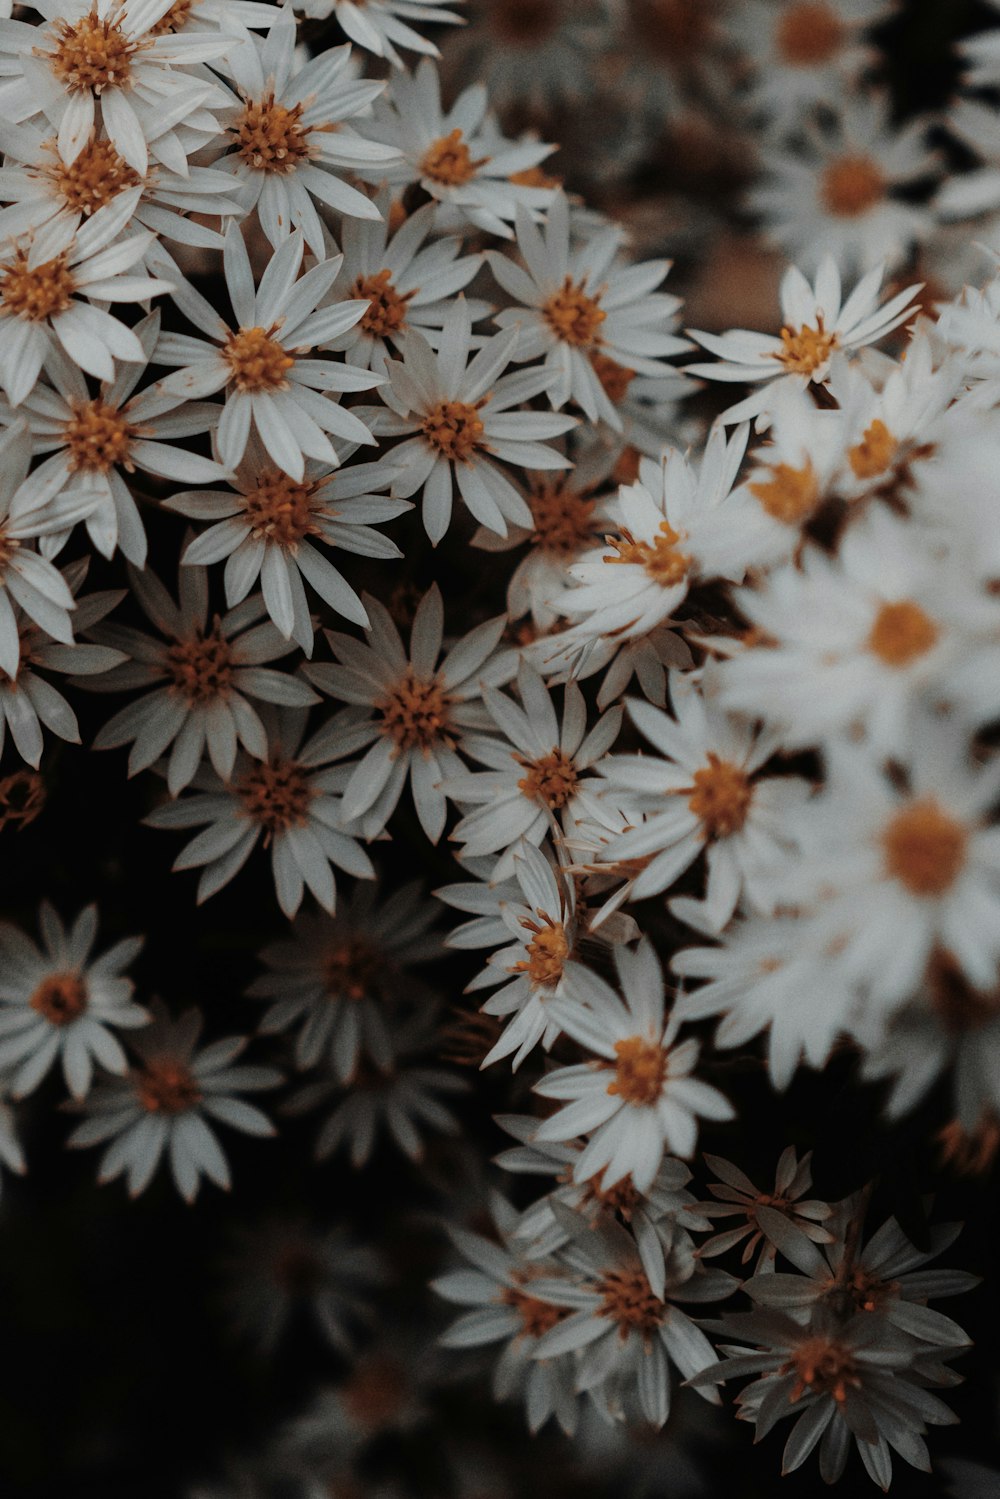 a bunch of white flowers with brown centers